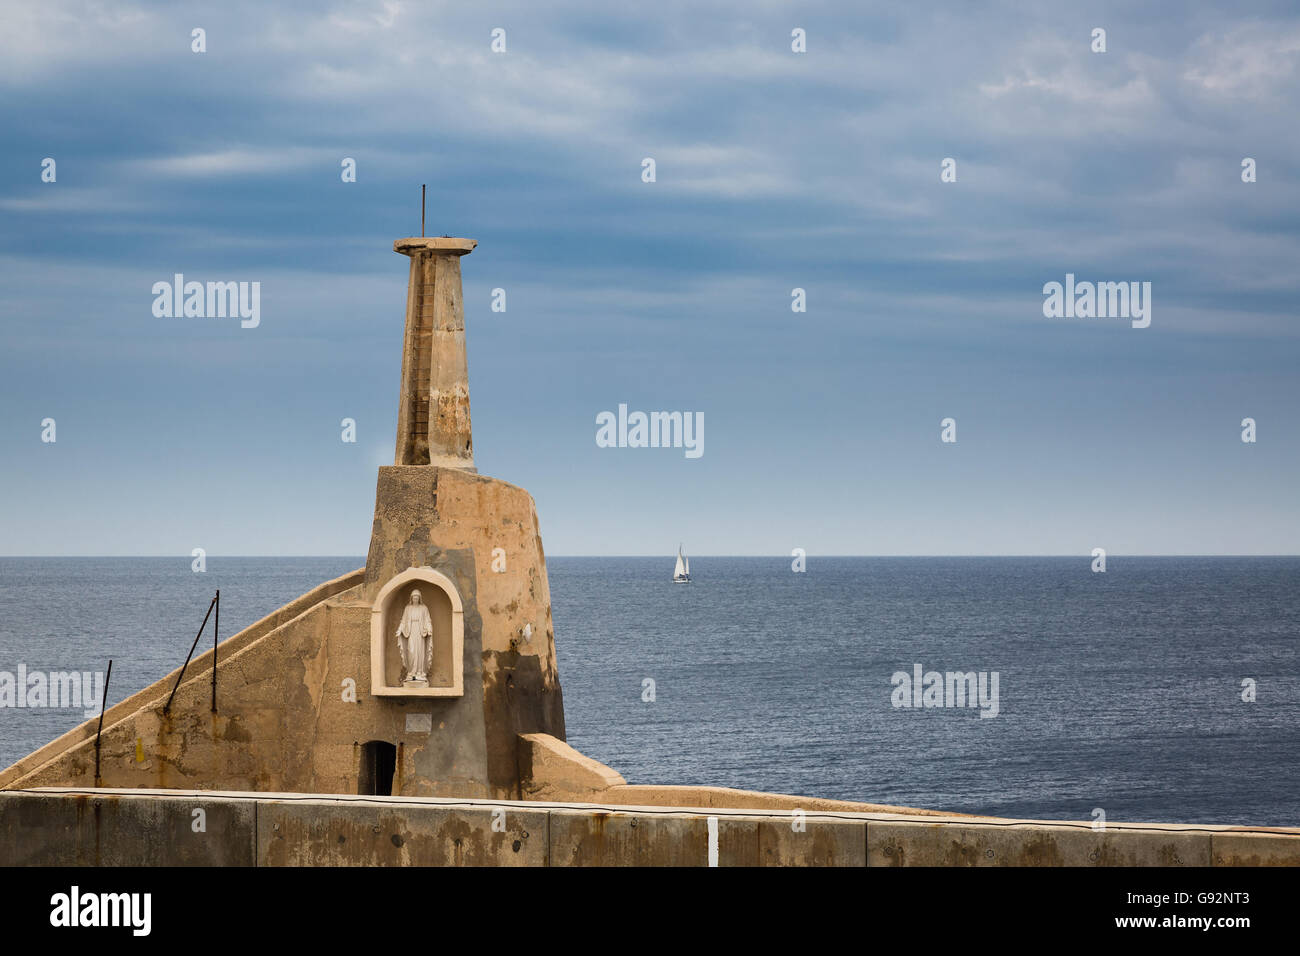 The guardian of small and large ships sailing from a port on the Mediterranean Cirkewwa on the Malta island Stock Photo